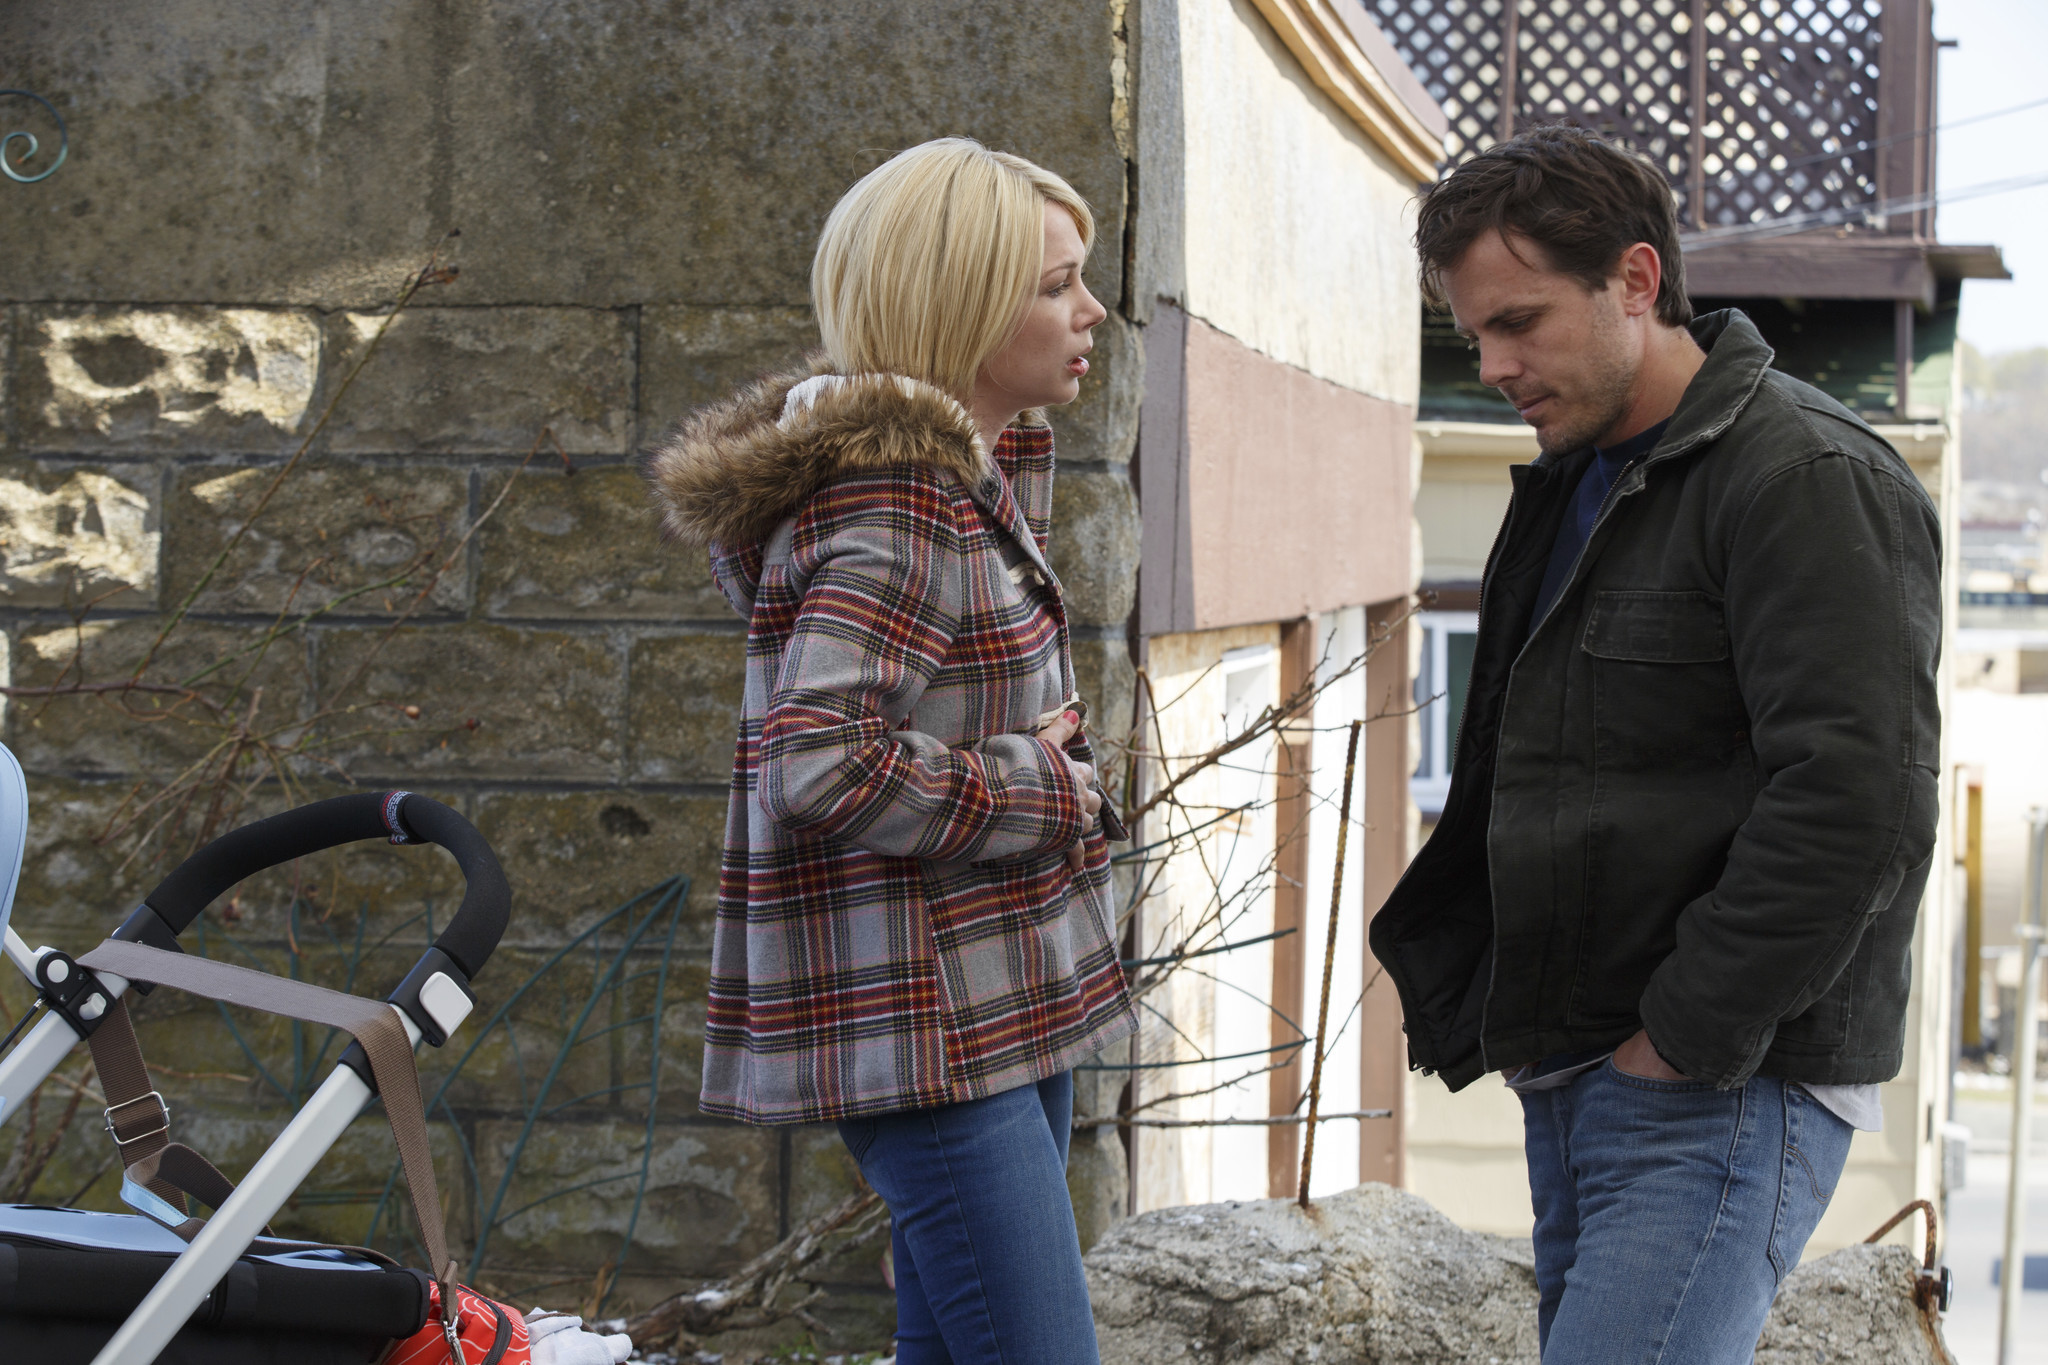 Michelle Williams and Casey Affleck in a scene from "Manchester by the Sea."